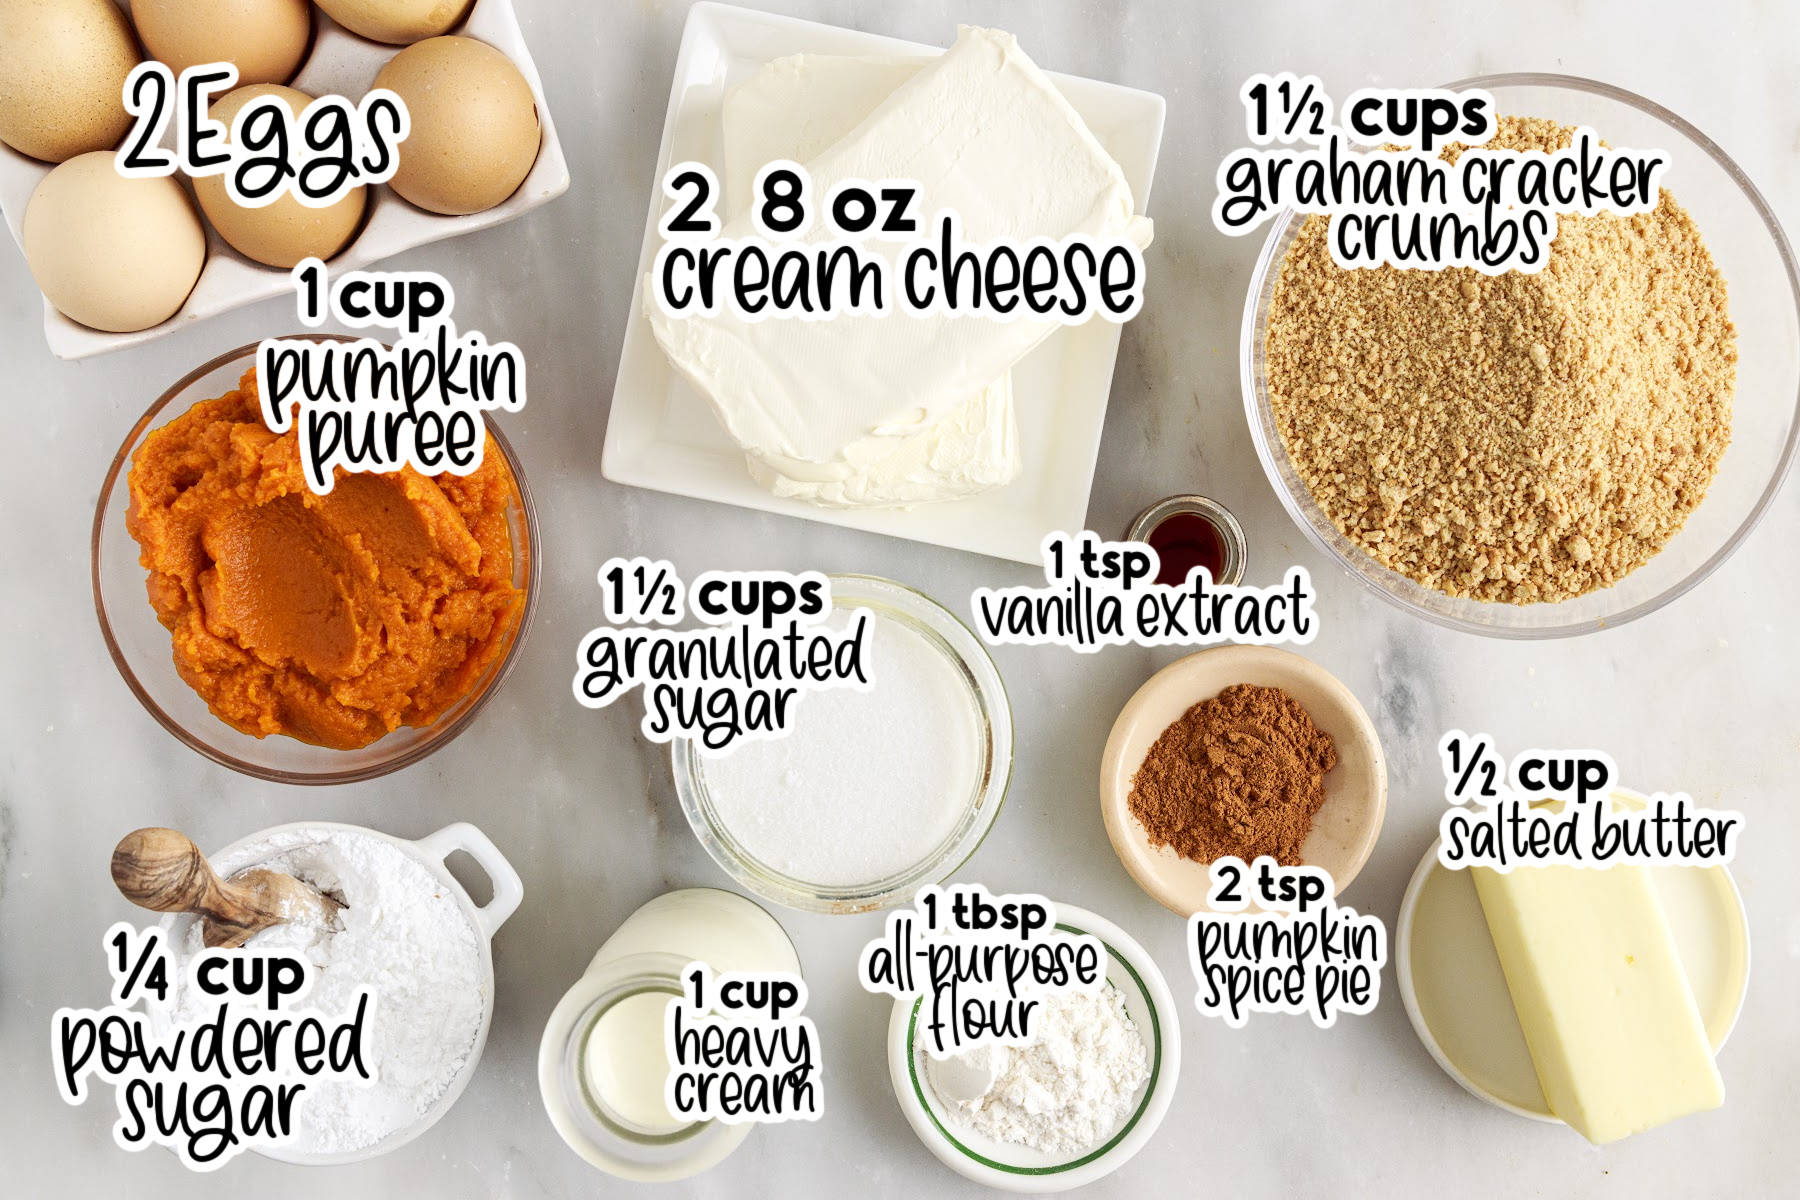 Inidividual plates and bowls with ingredients needed to make mini pumpkin cheesecakes, with text labels.